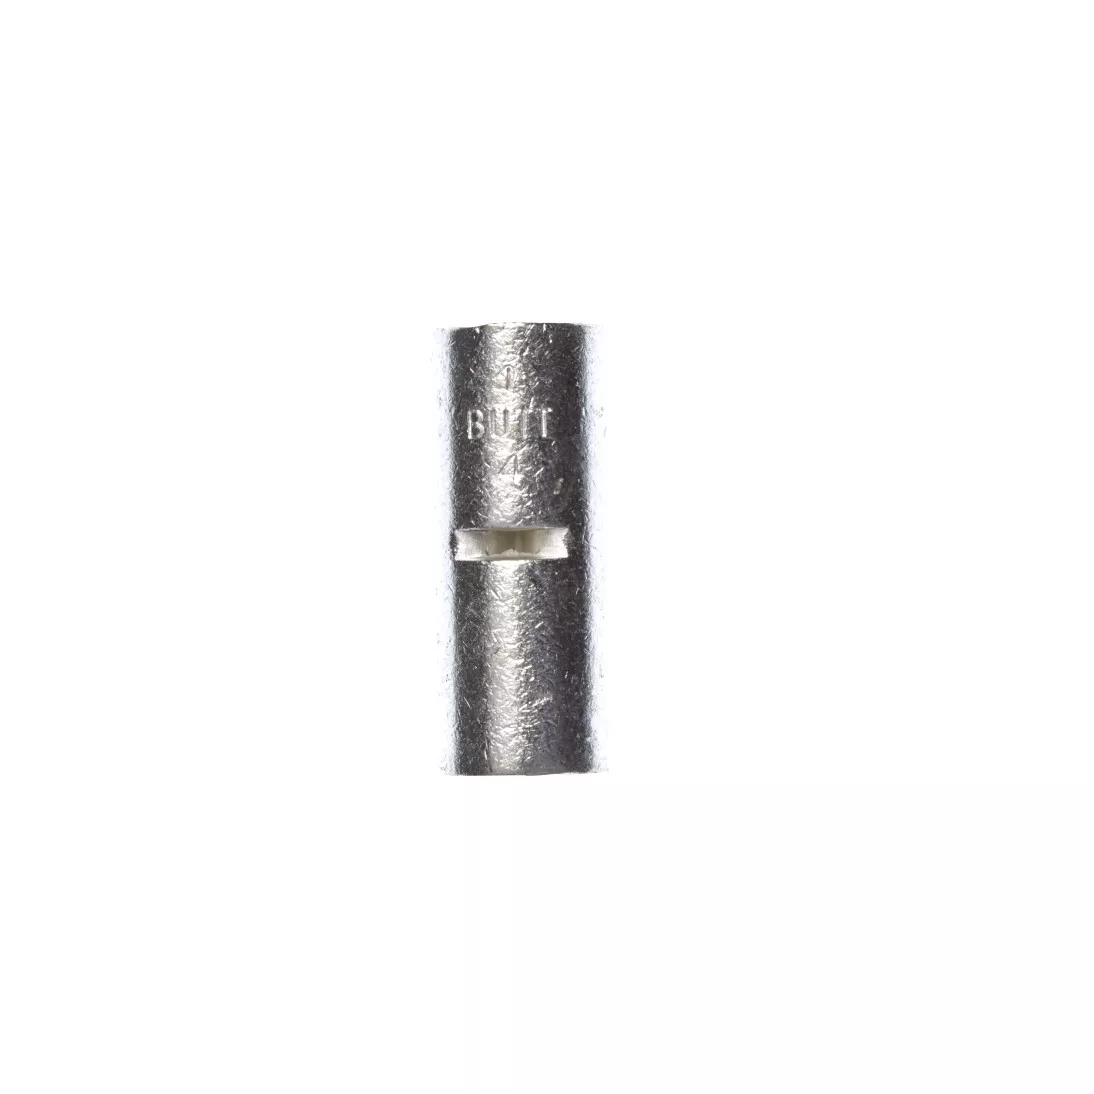 3M™ Scotchlok™ Butt Connector, Non-Insulated Brazed Seam M4BCK, 4 AWG,
built-in wire stop for correct positioning, 200/Case